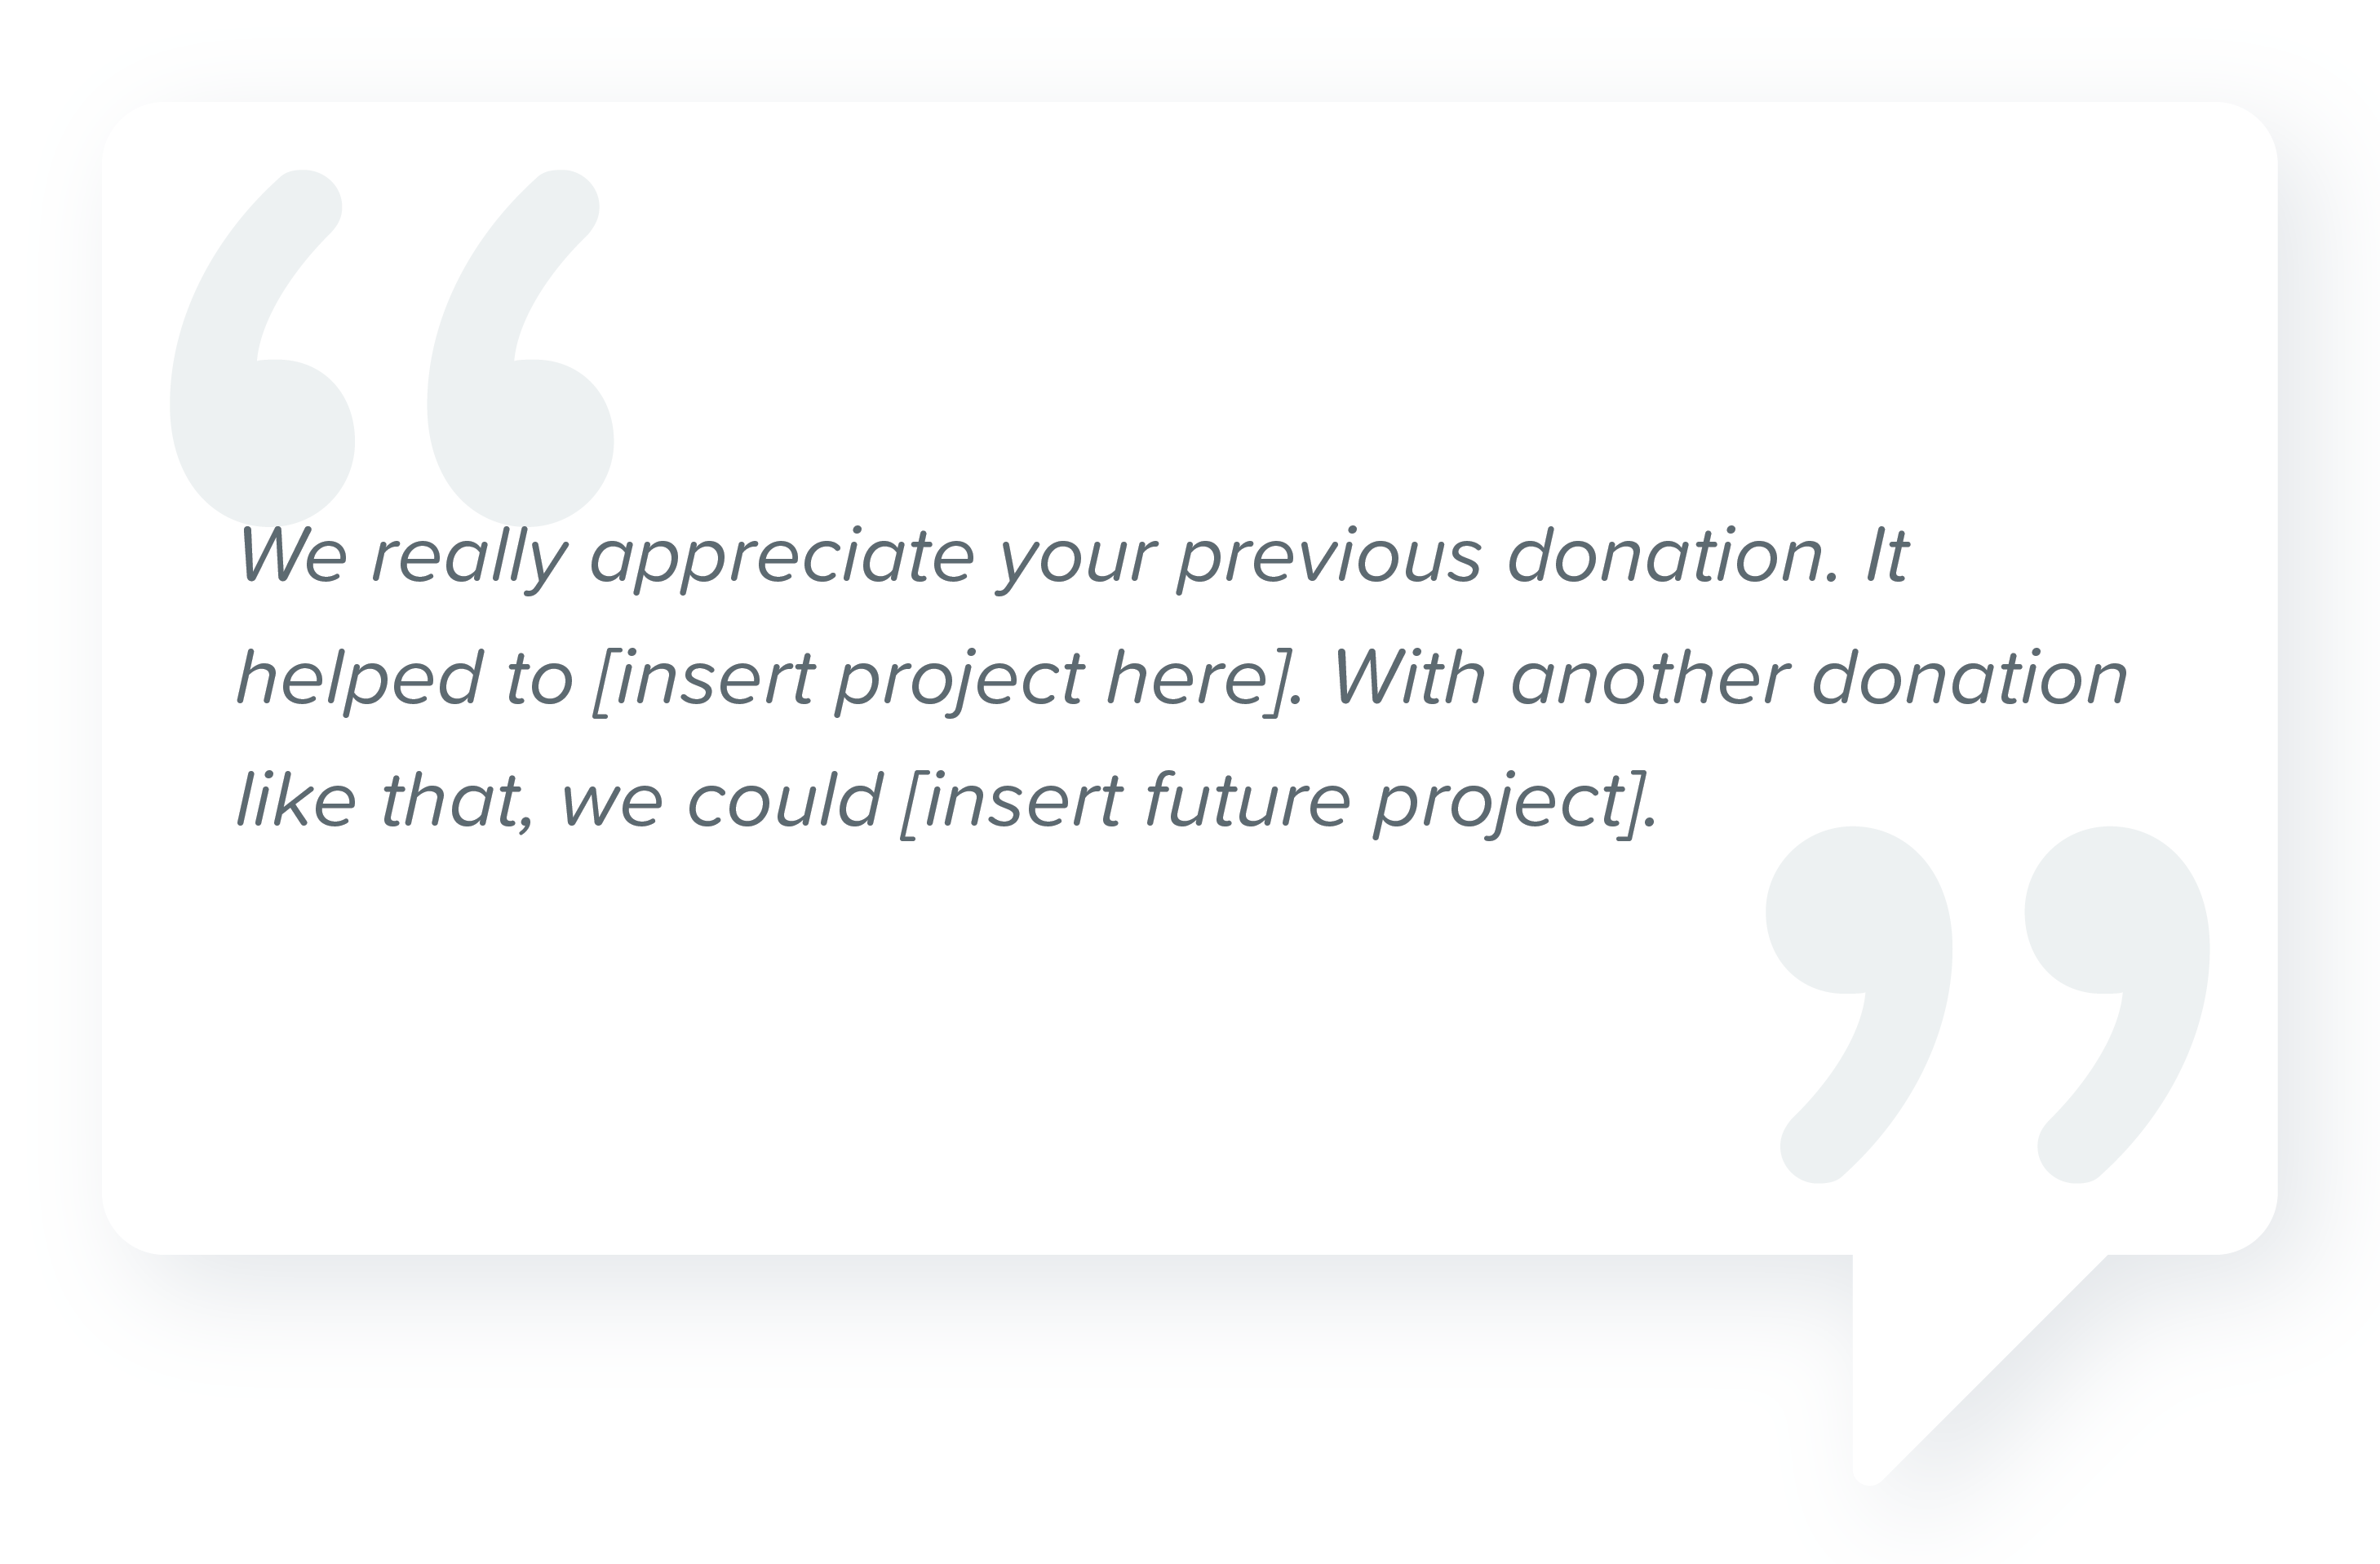 sample script for asking for donations over the phone with quote, "We really appreciate your previous donation. It helped to [insert project here]. With another donation like that, we could [insert future project]."